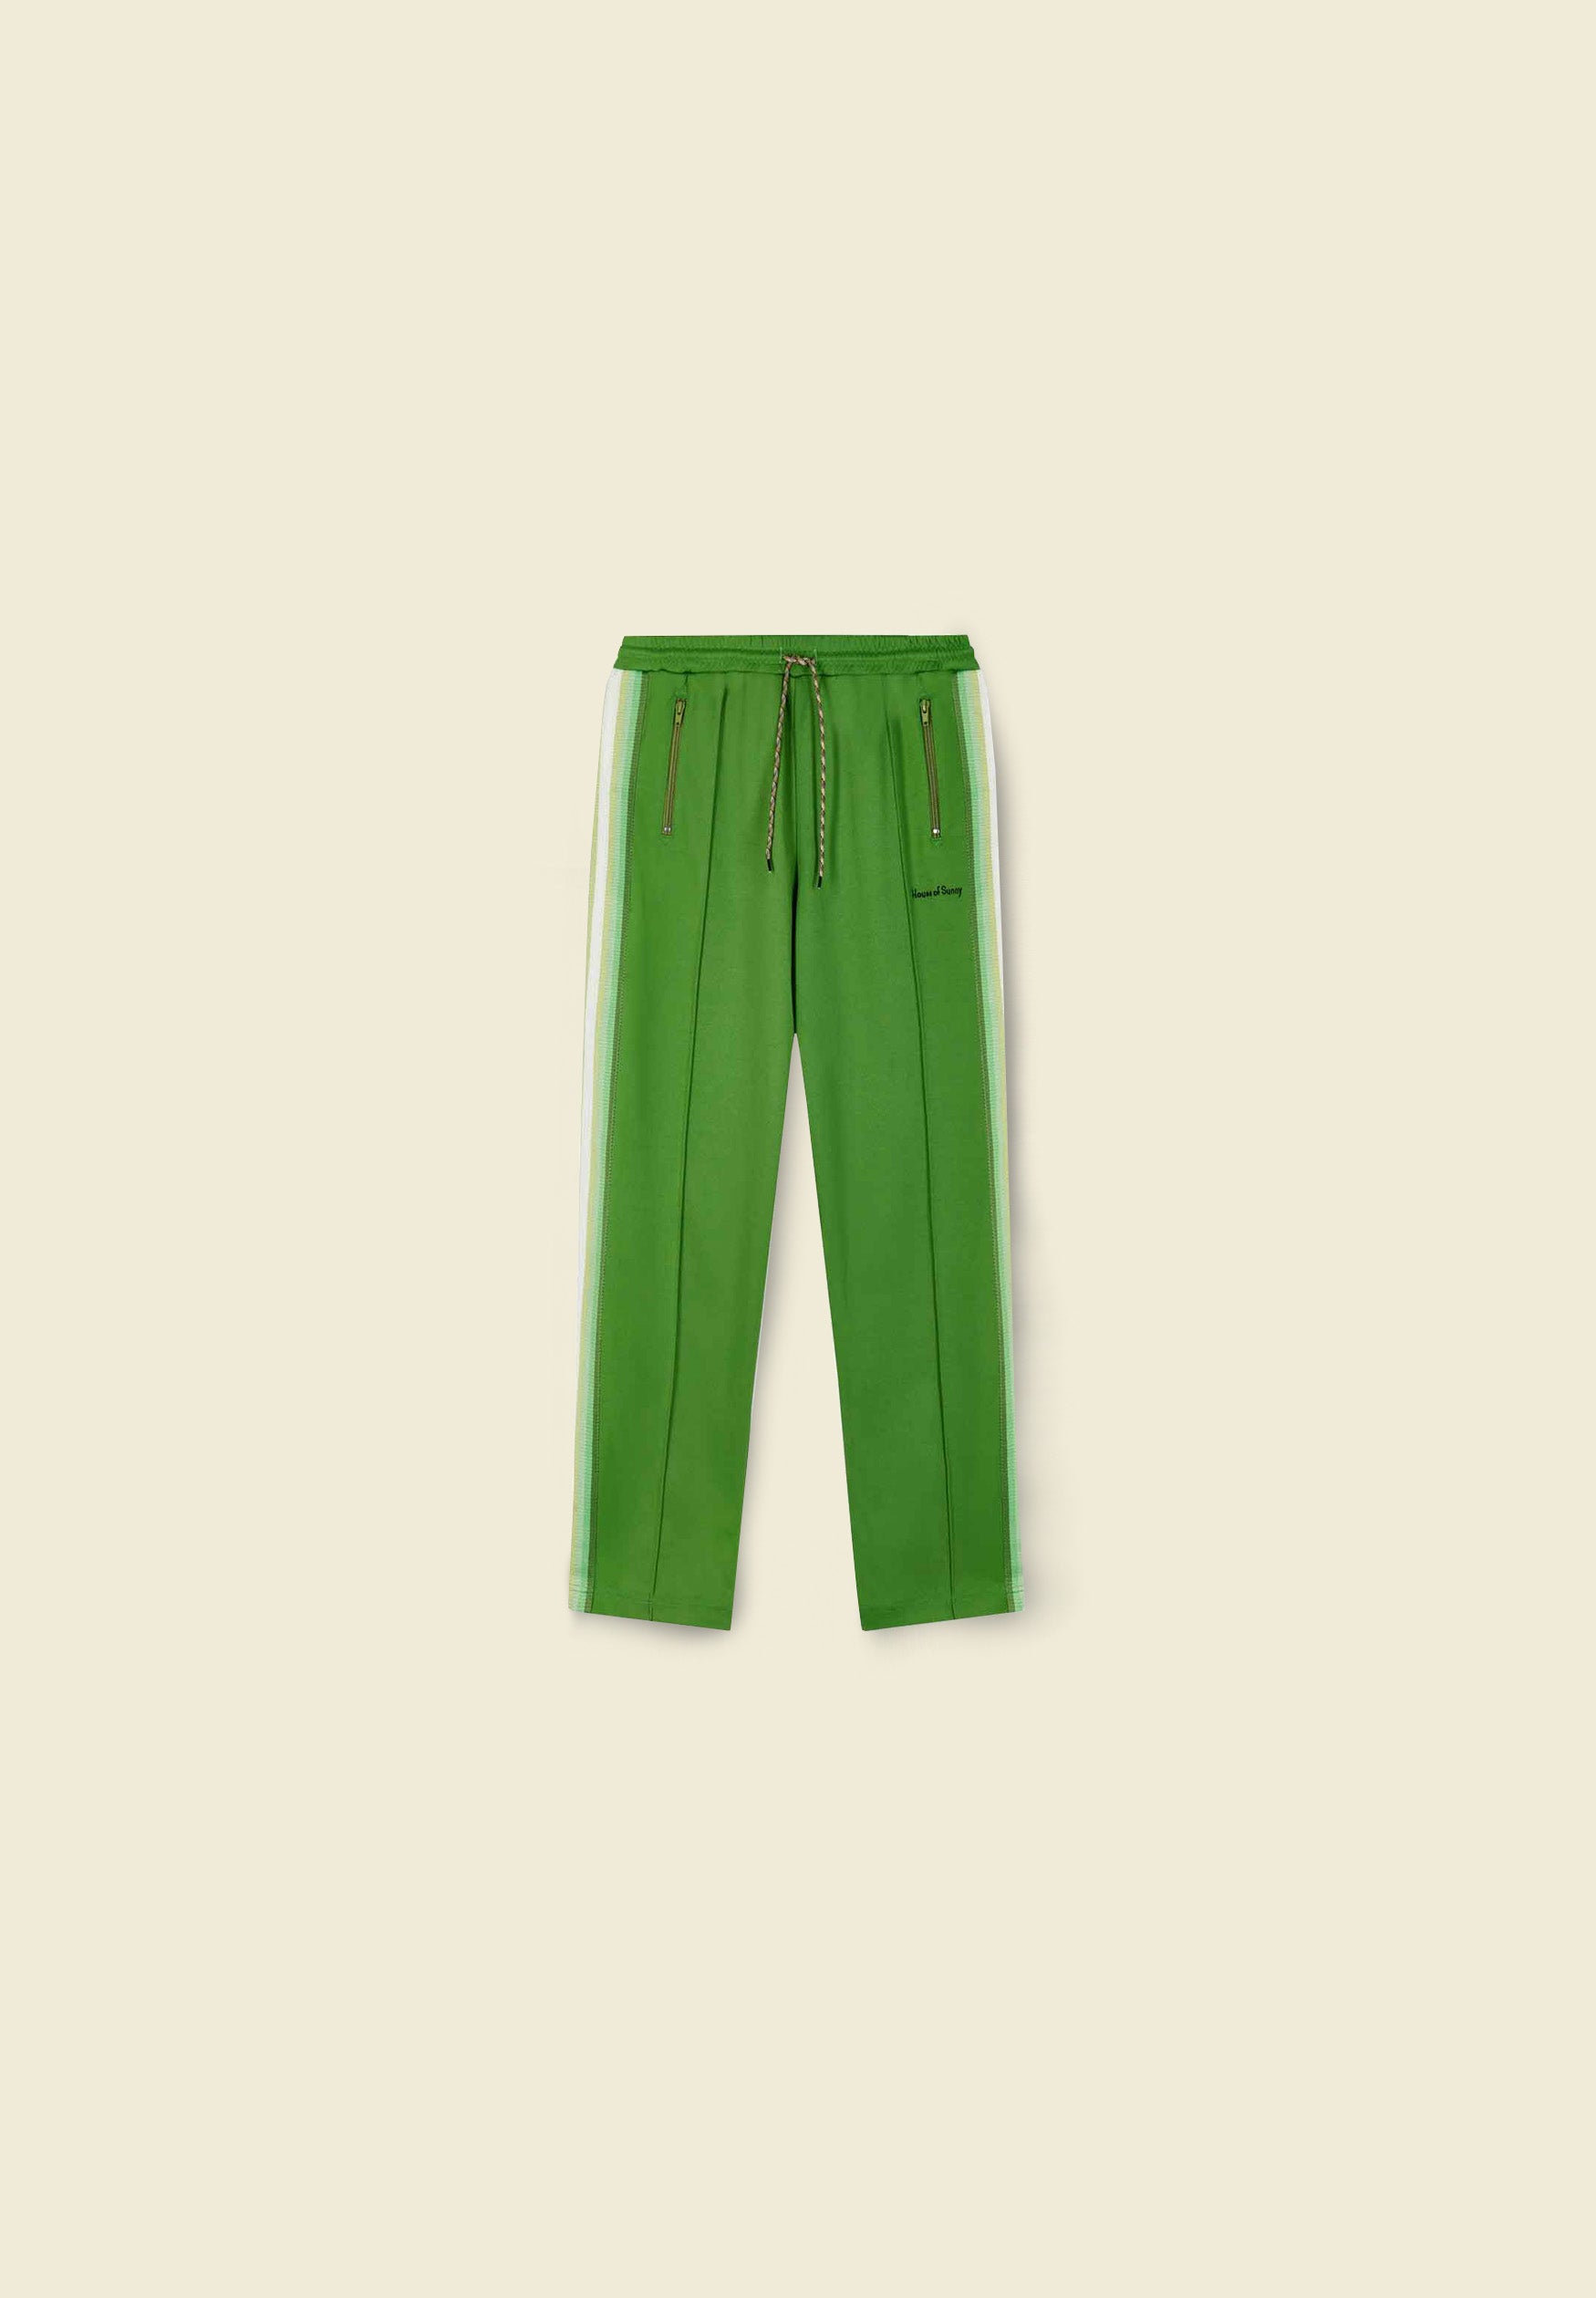 Woolen Track Pants Trousers Harem Lounge Shorts - Buy Woolen Track Pants  Trousers Harem Lounge Shorts online in India